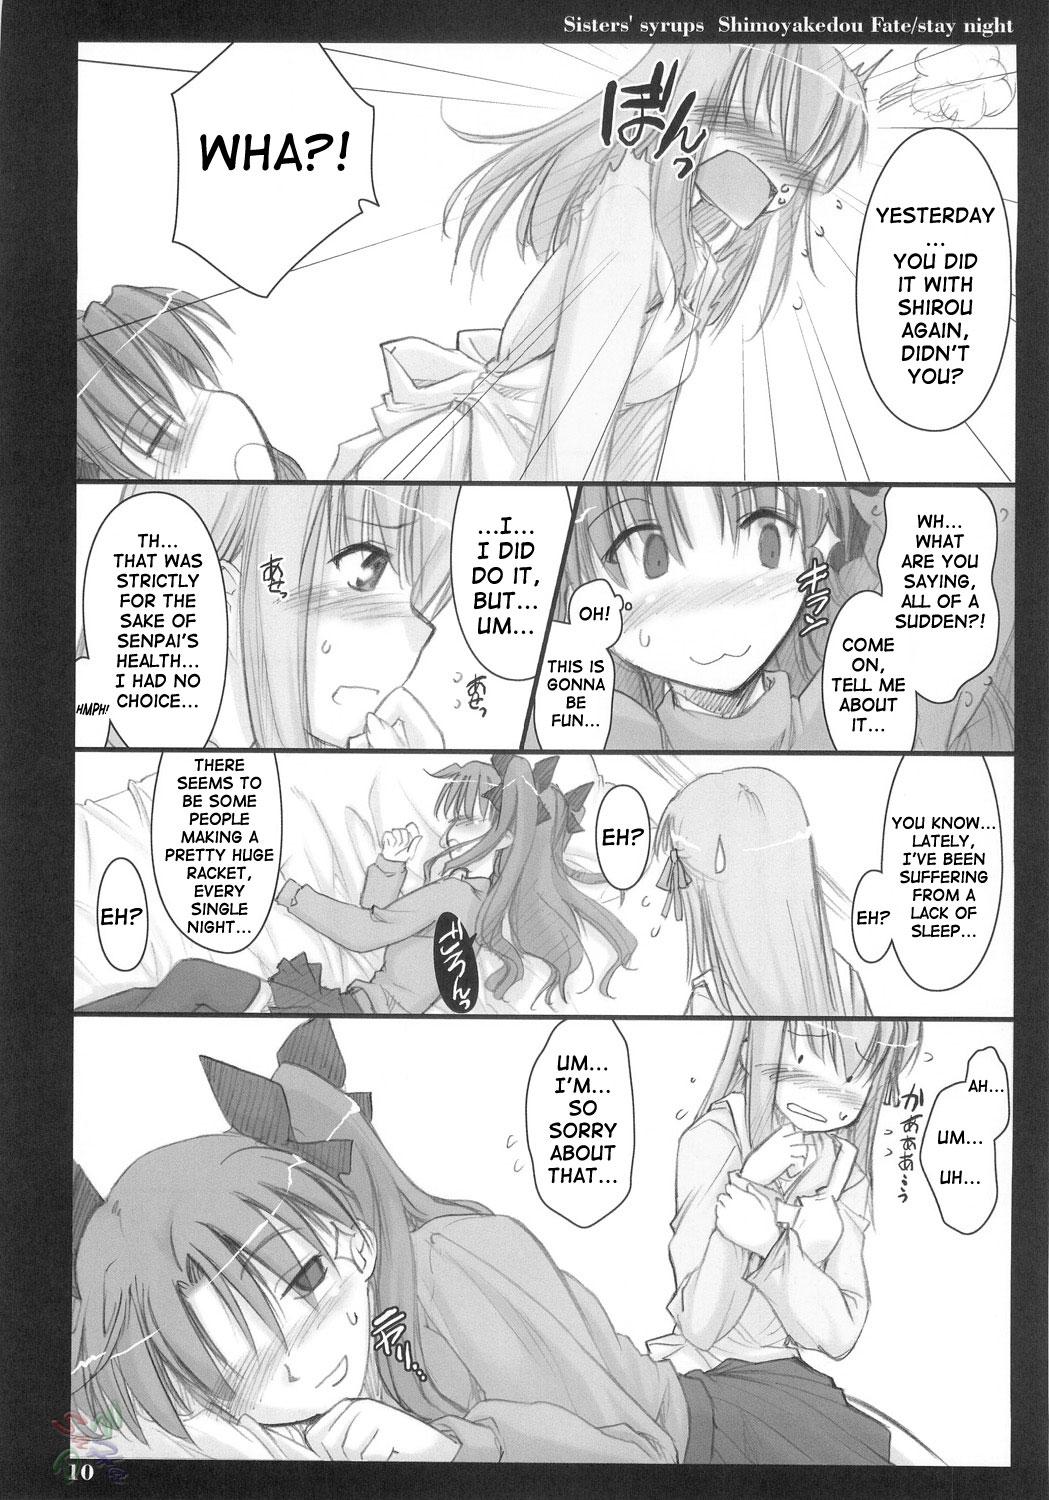 Rough Sex Sisters' Syrups - Fate stay night Amateur Porno - Page 9